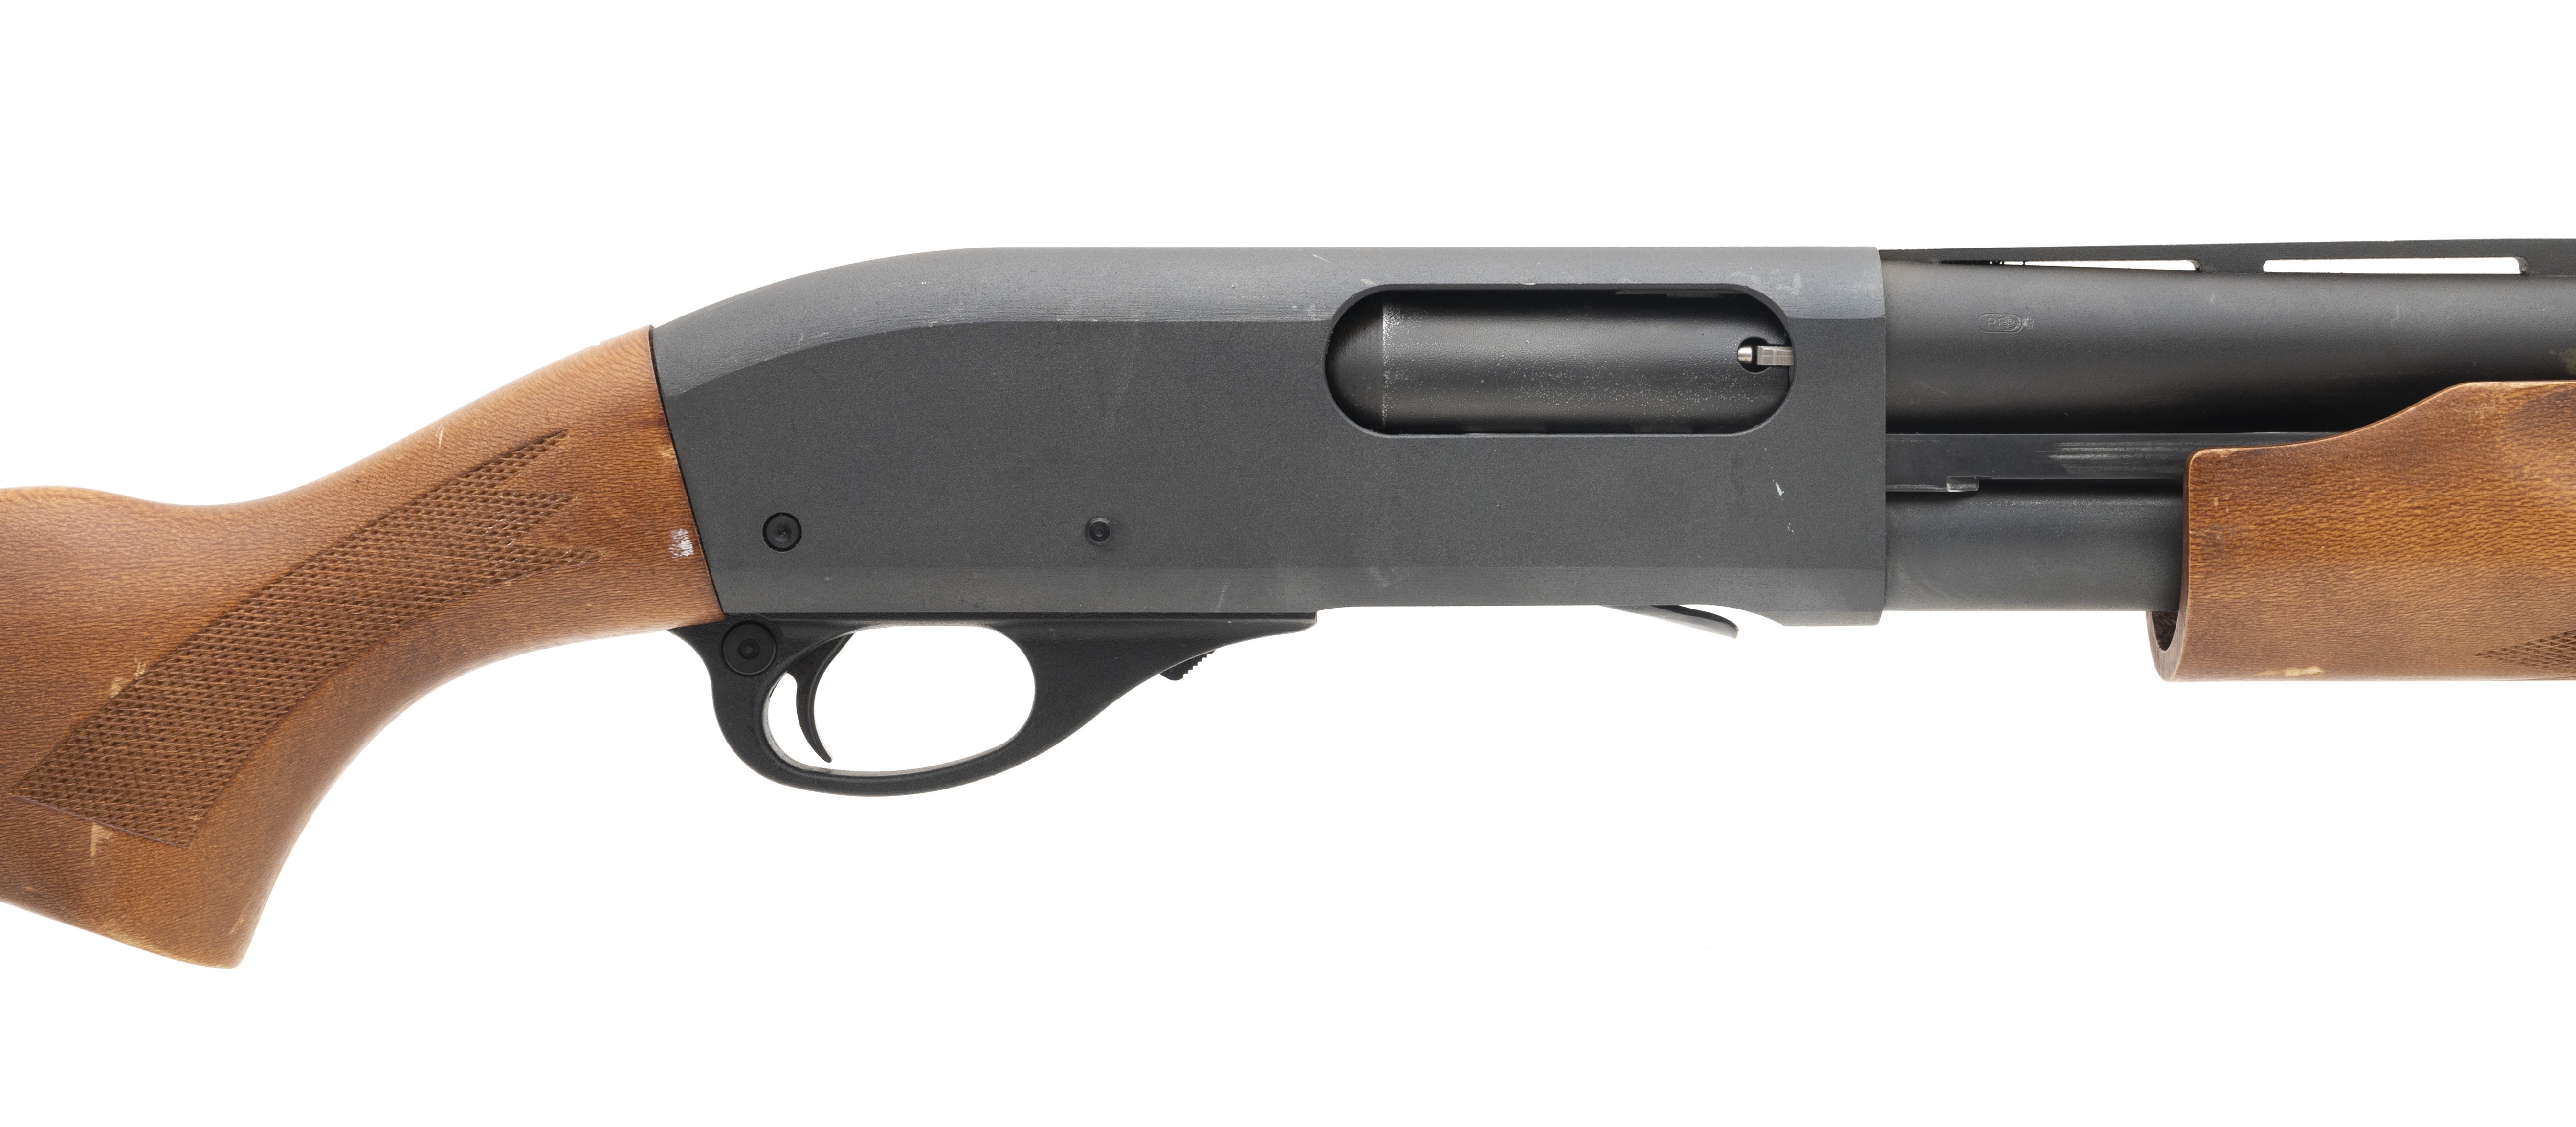 remington-870-price-how-do-you-price-a-switches